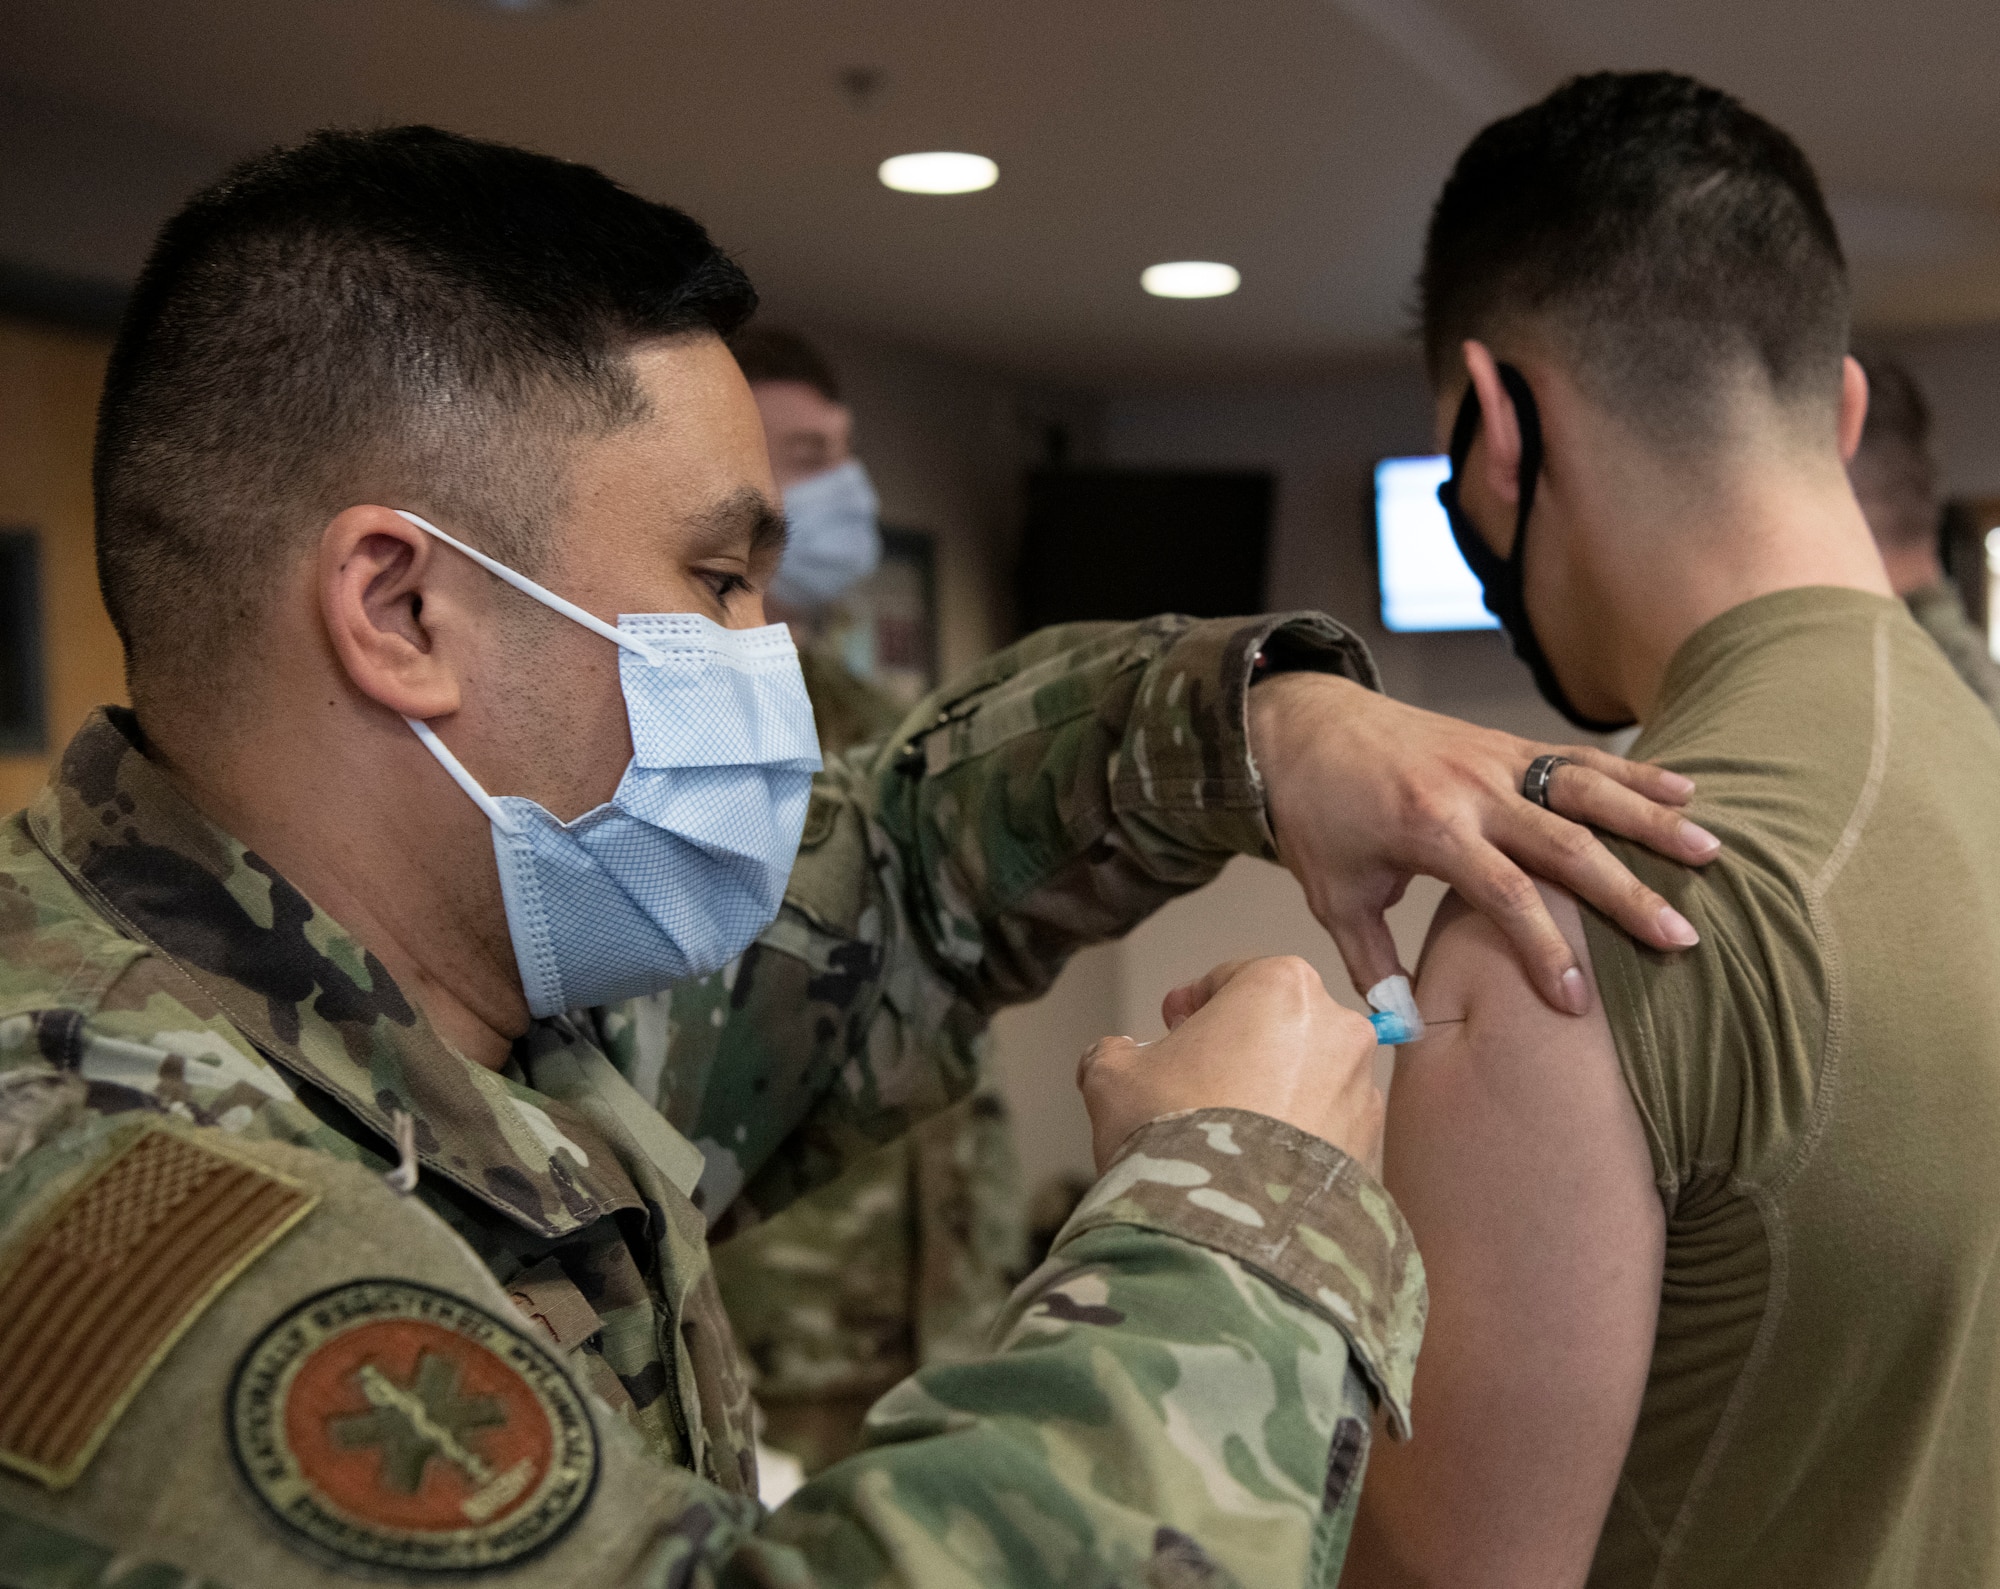 Tech. Sgt. Michael Vasillas, 319th Health Care Operations Squadron aerospace medical technician, administers a COVID-19 vaccine to an airman at Grand Forks Air Force Base, N.D., Jan. 21, 2021. Following vaccination, DoD personnel are still expected to follow CDC guidelines, including the use of masks and physical distancing.